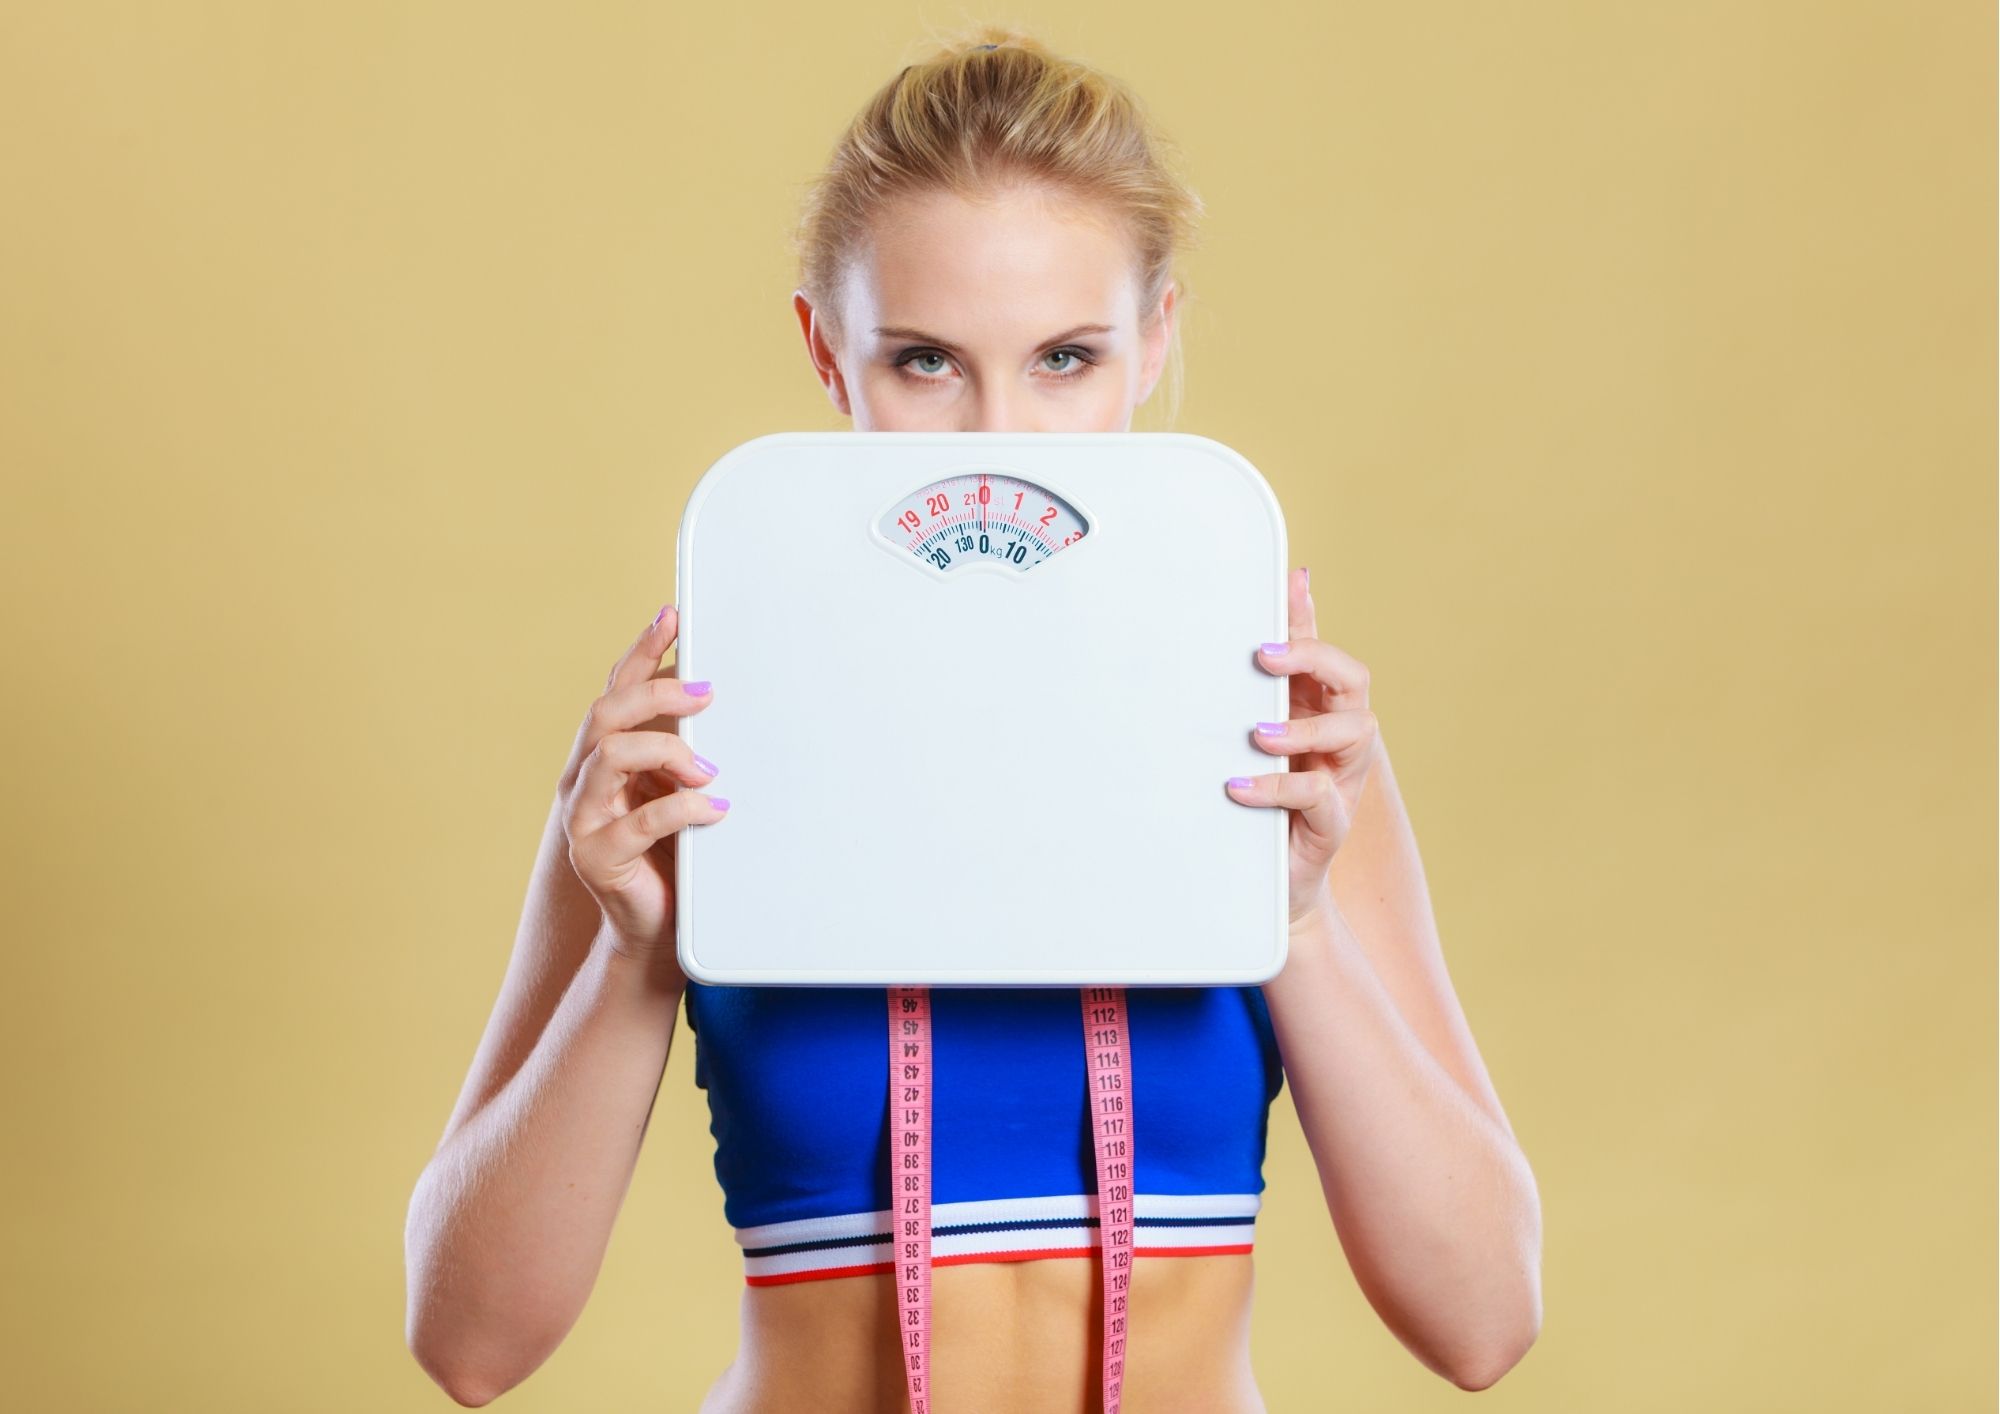 Weight loss or body composition?